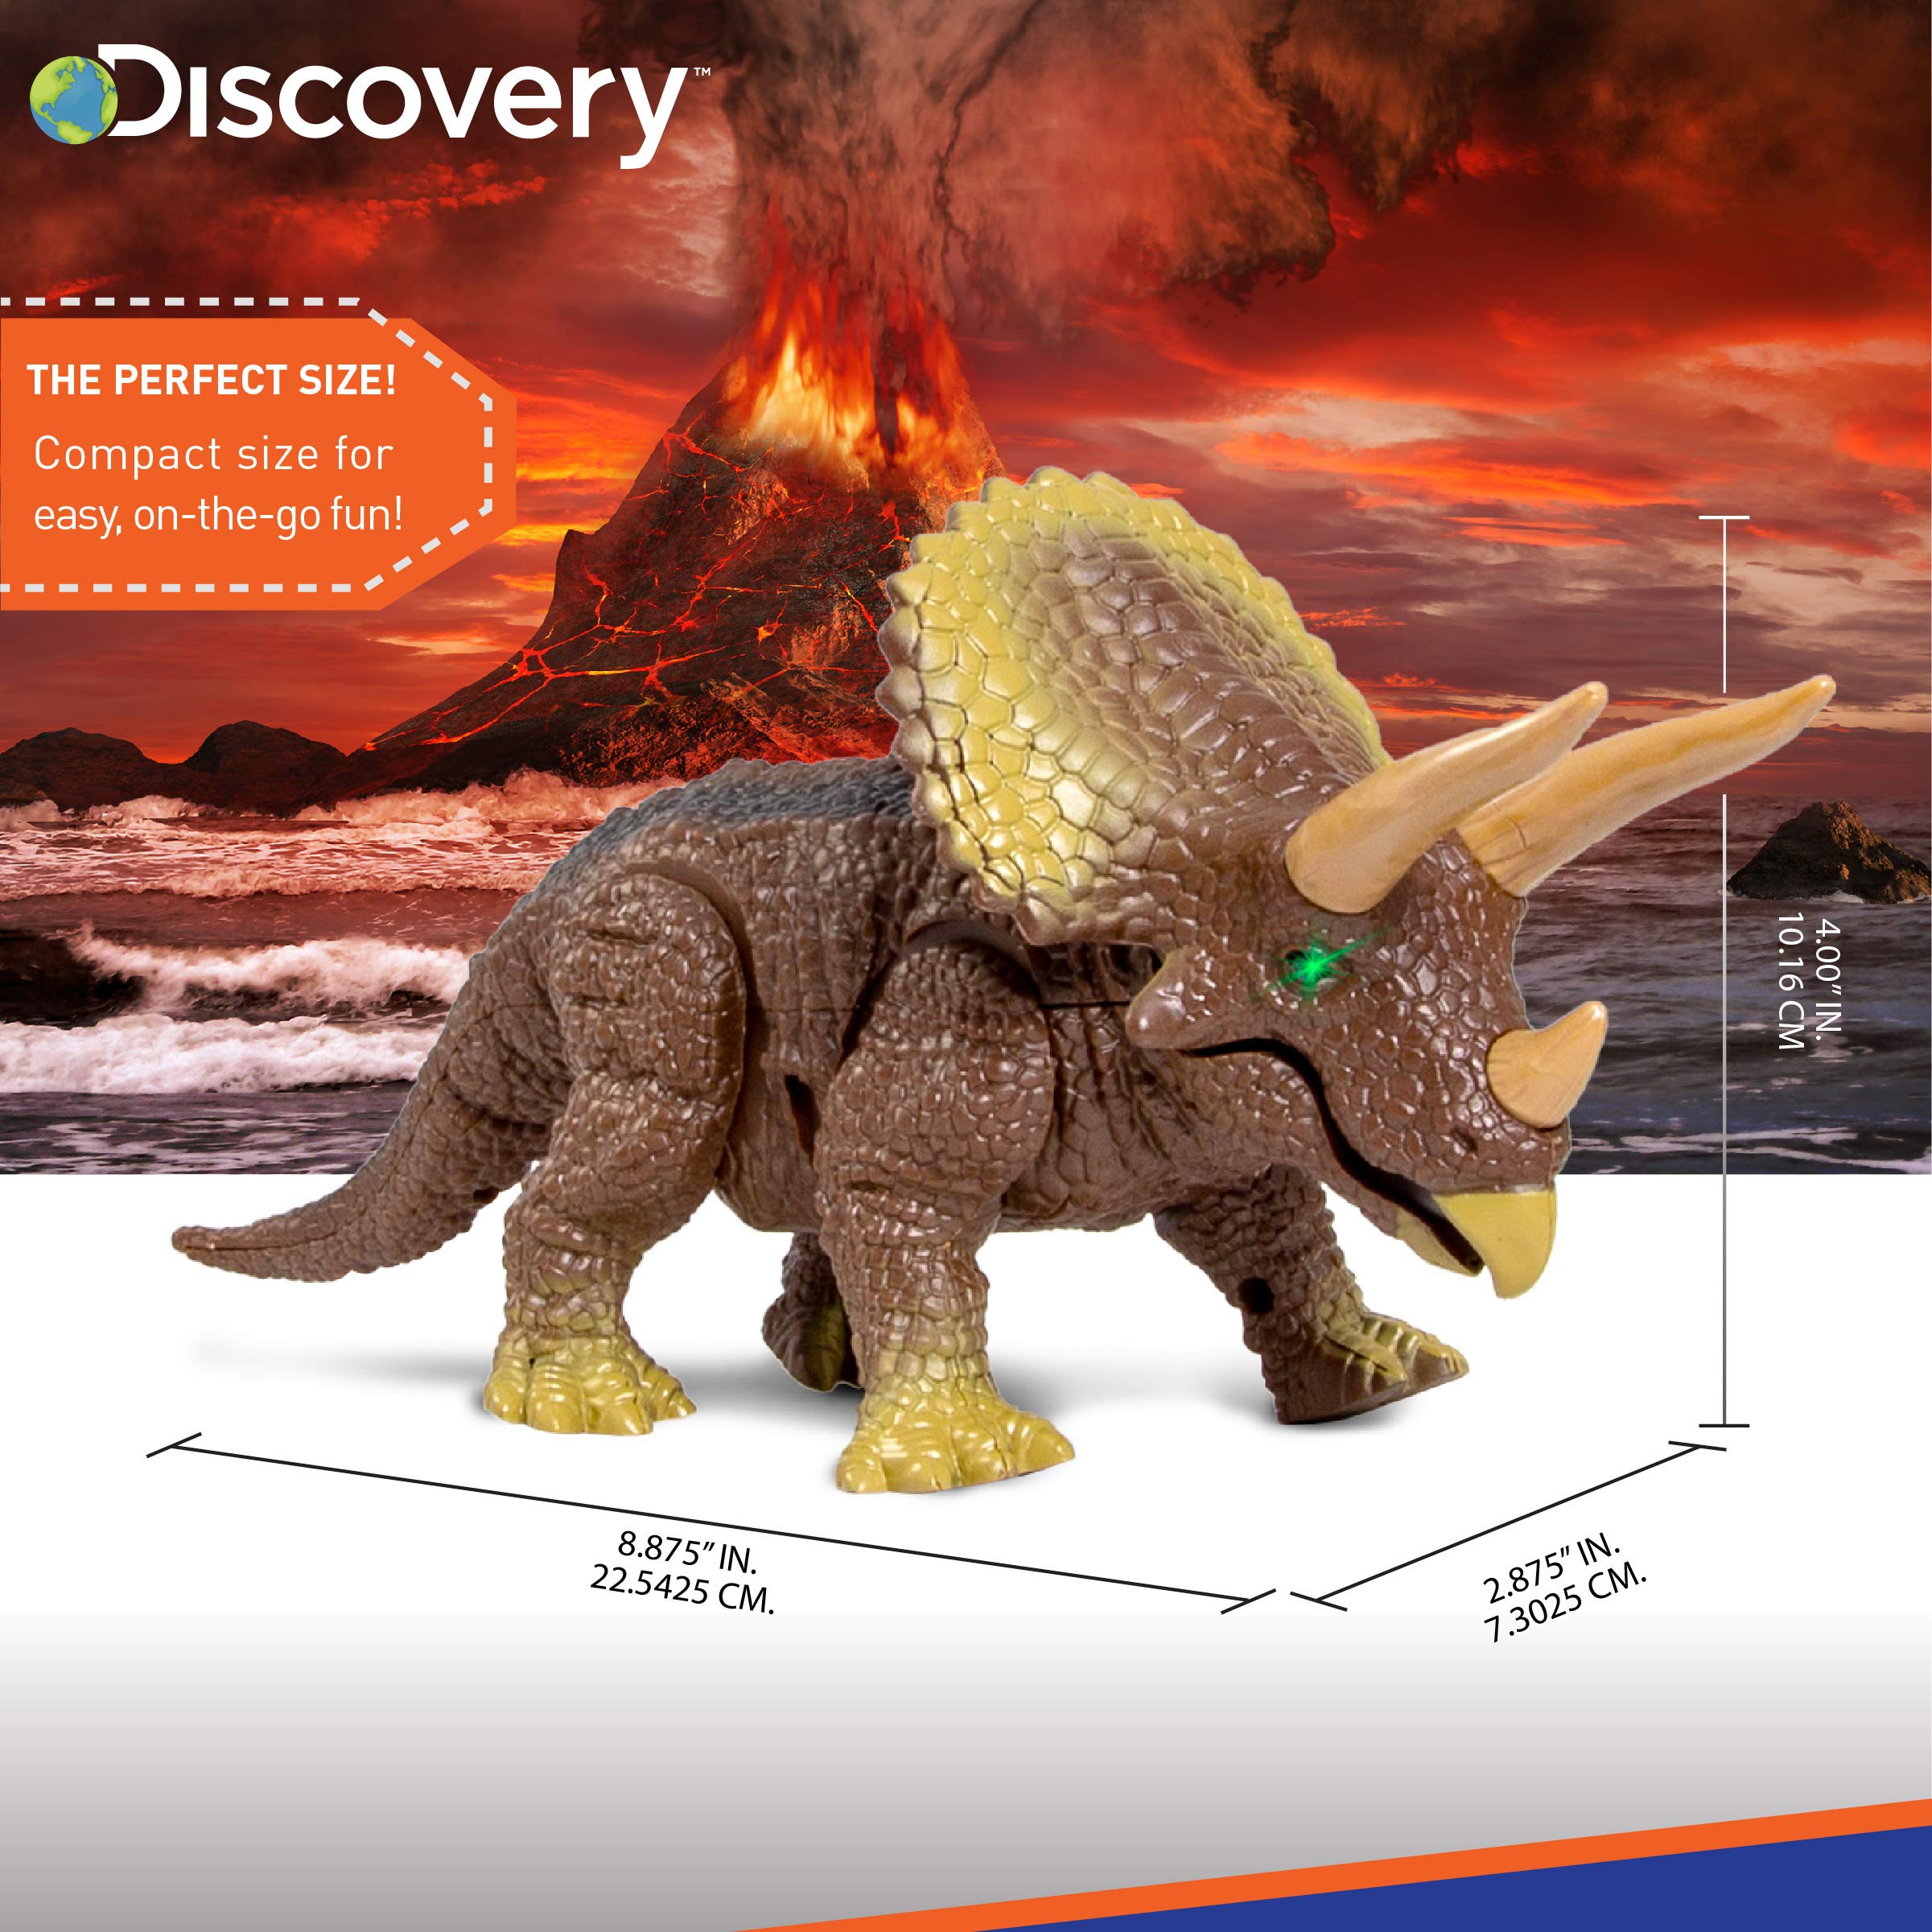 Discovery Kids RC Triceratops, LED Infrared Remote Control Dinosaur, Built-in Speakers W/Digital Sound Effects, 8.75